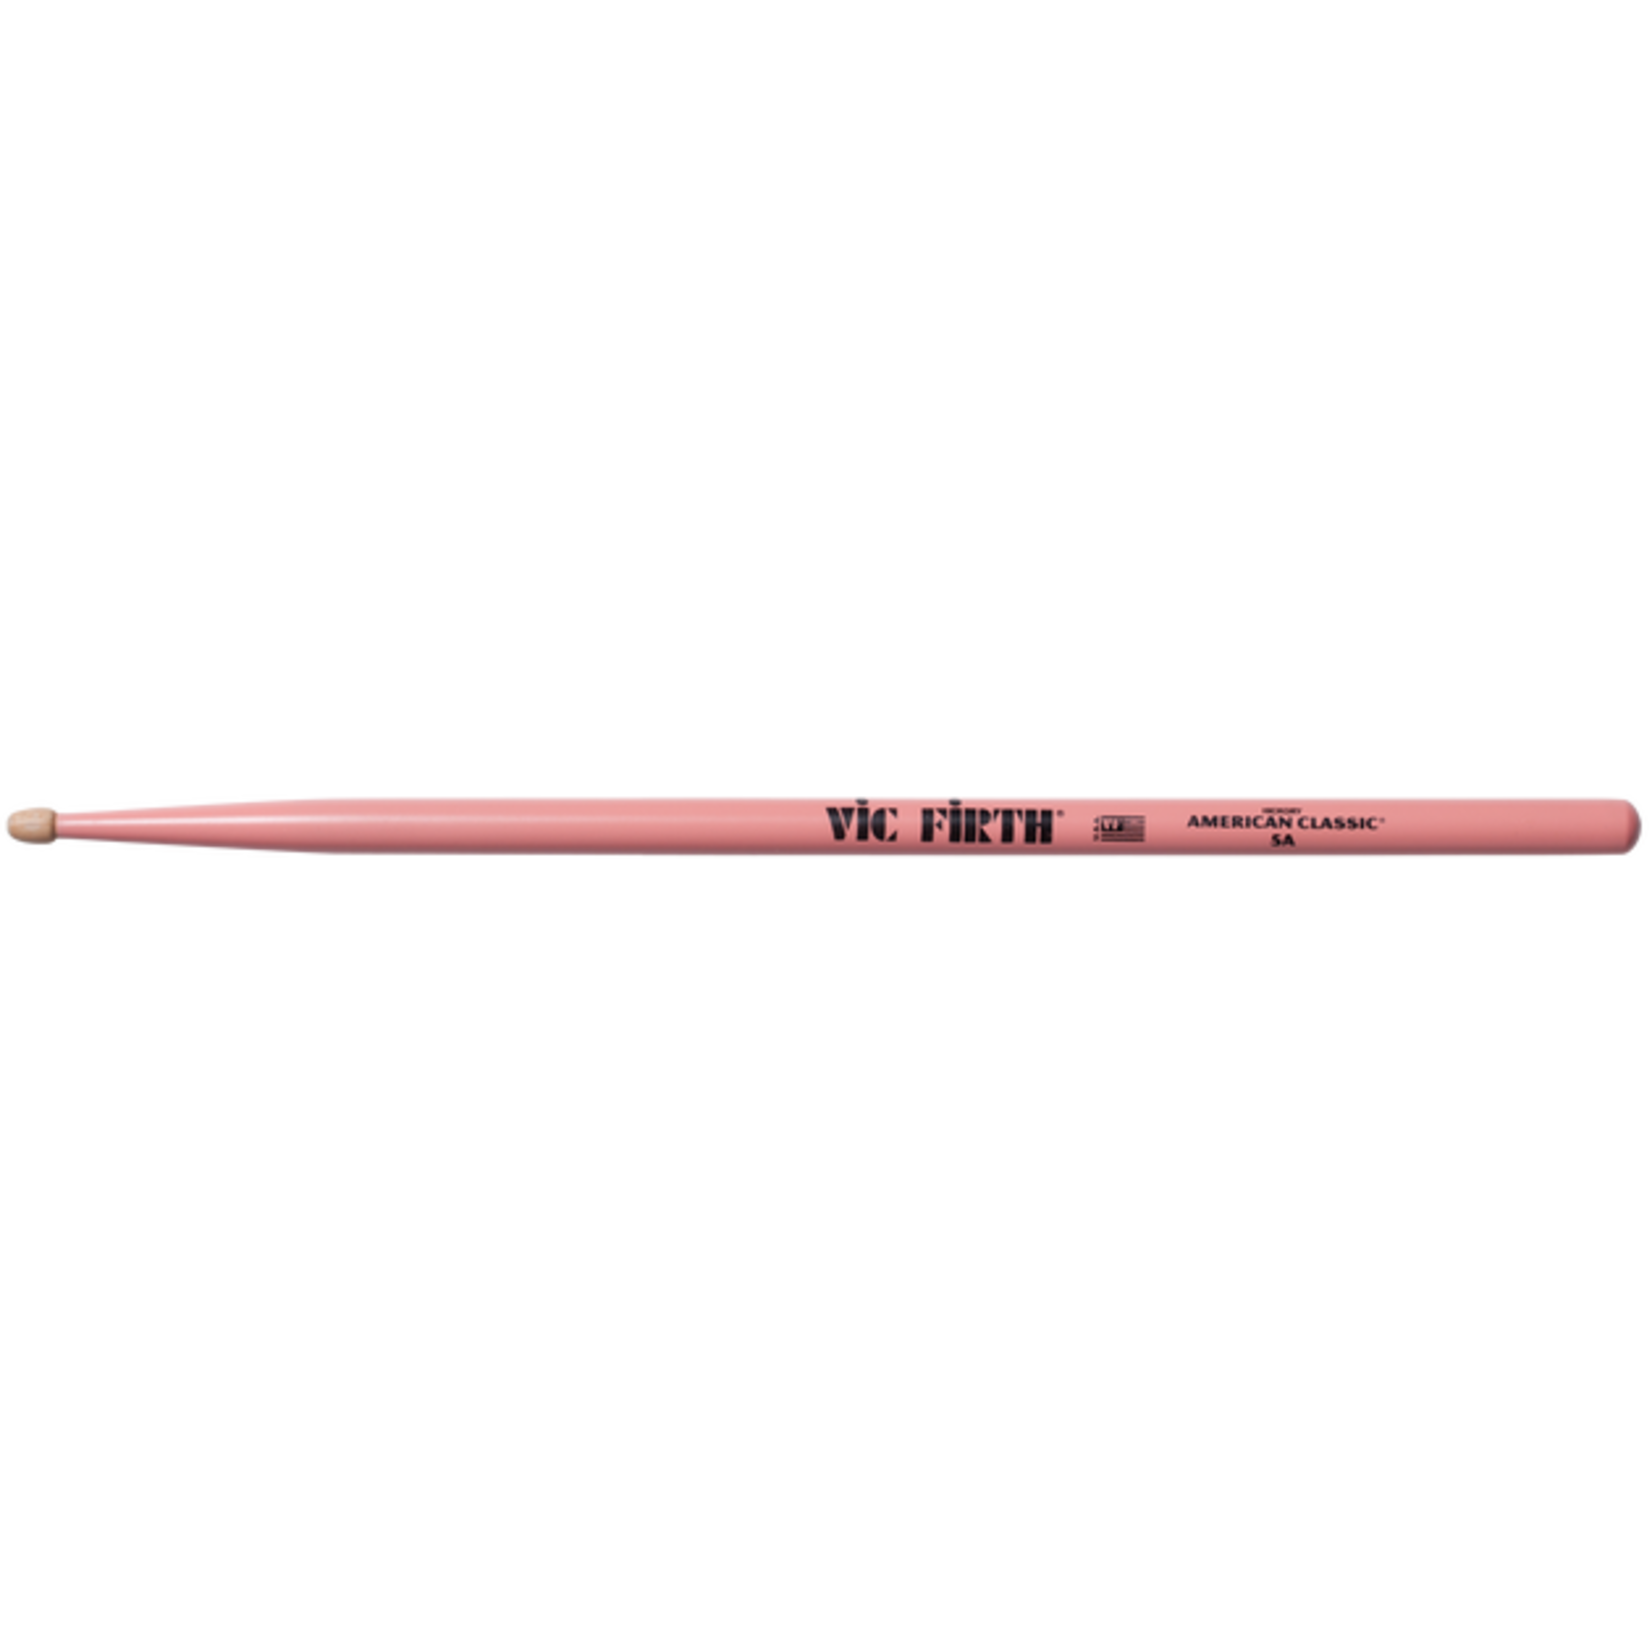 Vic Firth VIC FIRTH AMERICAN CLASSIC 5A PINK WOOD TIP (PAIR)